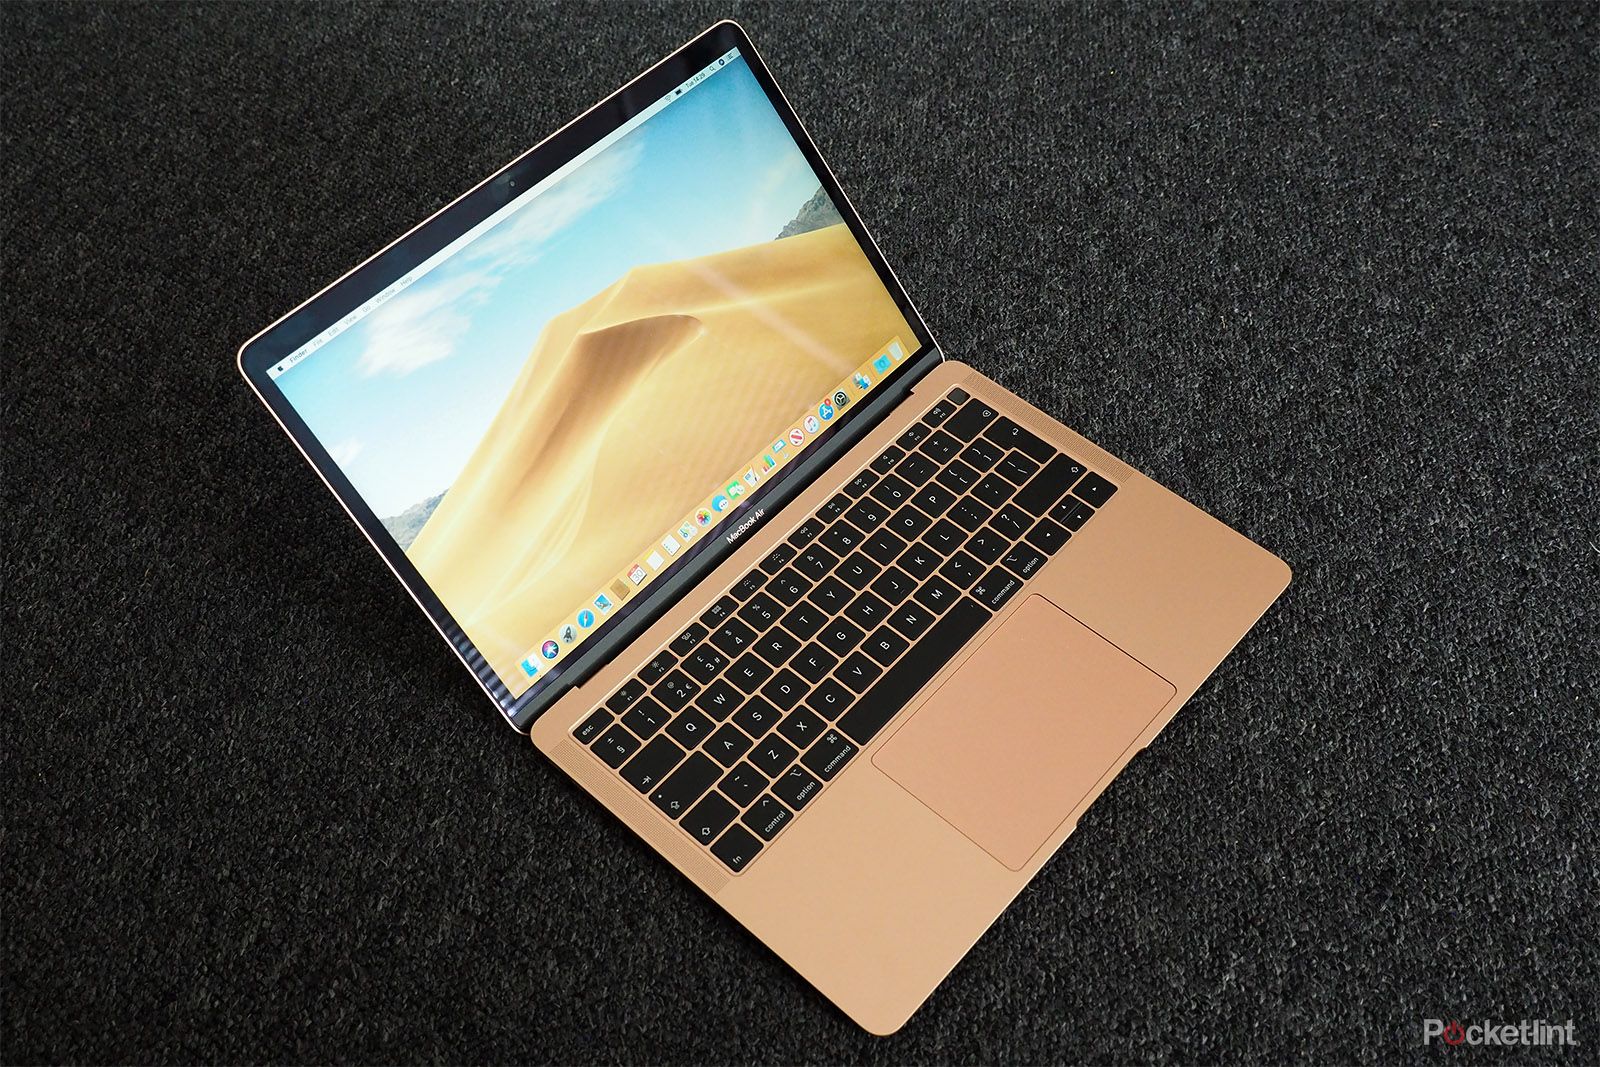 Review: The 2019 MacBook Air carries the legacy of the line very well